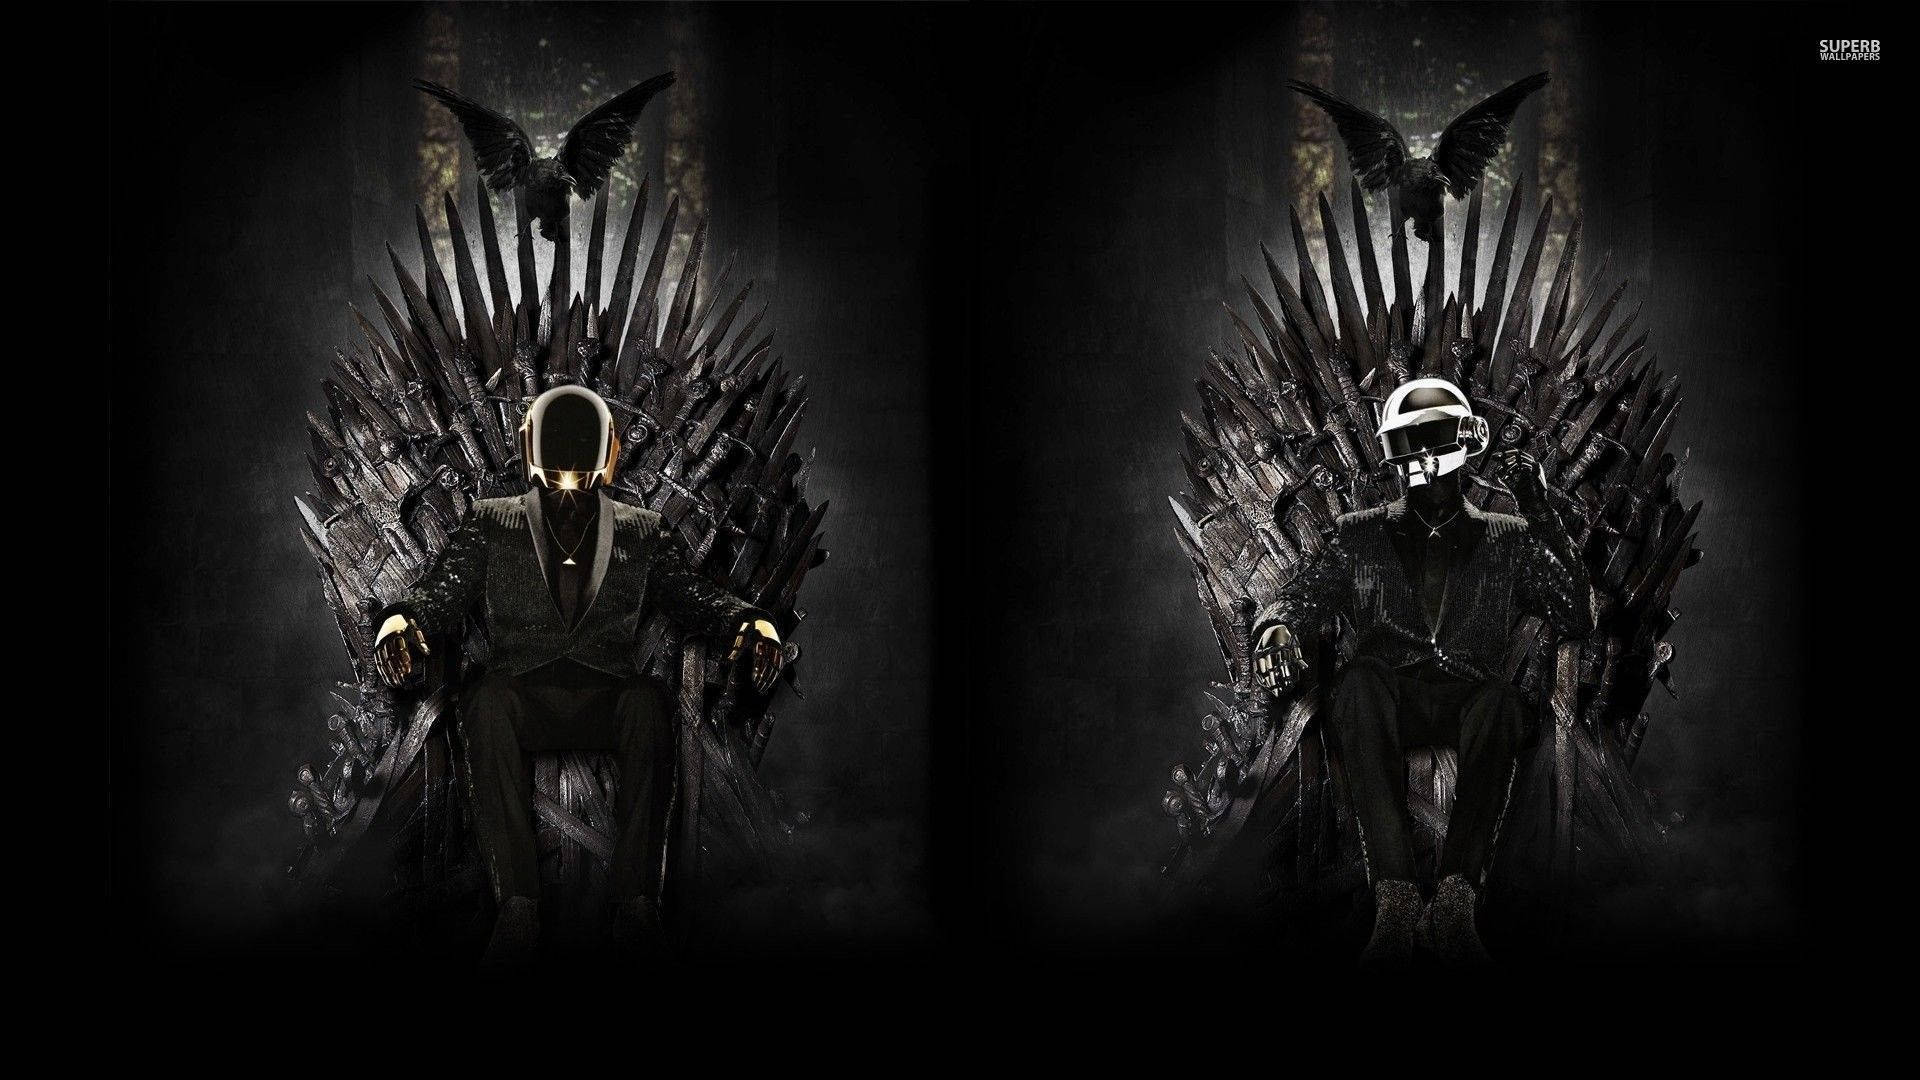 Cool Fan Art Of Game Of Thrones